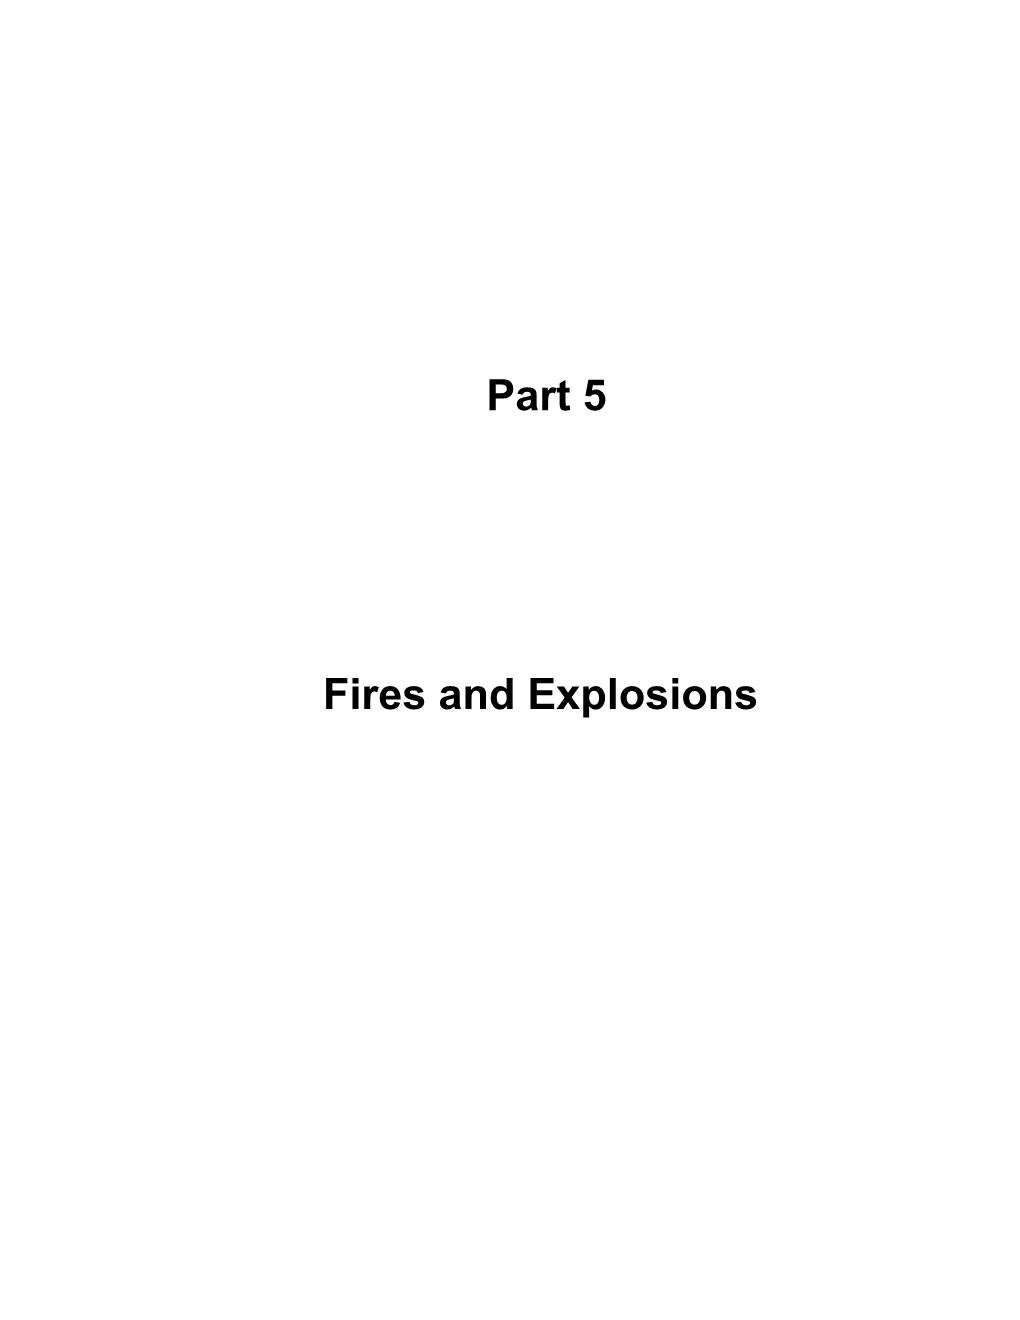 Part 5 Fires and Explosions